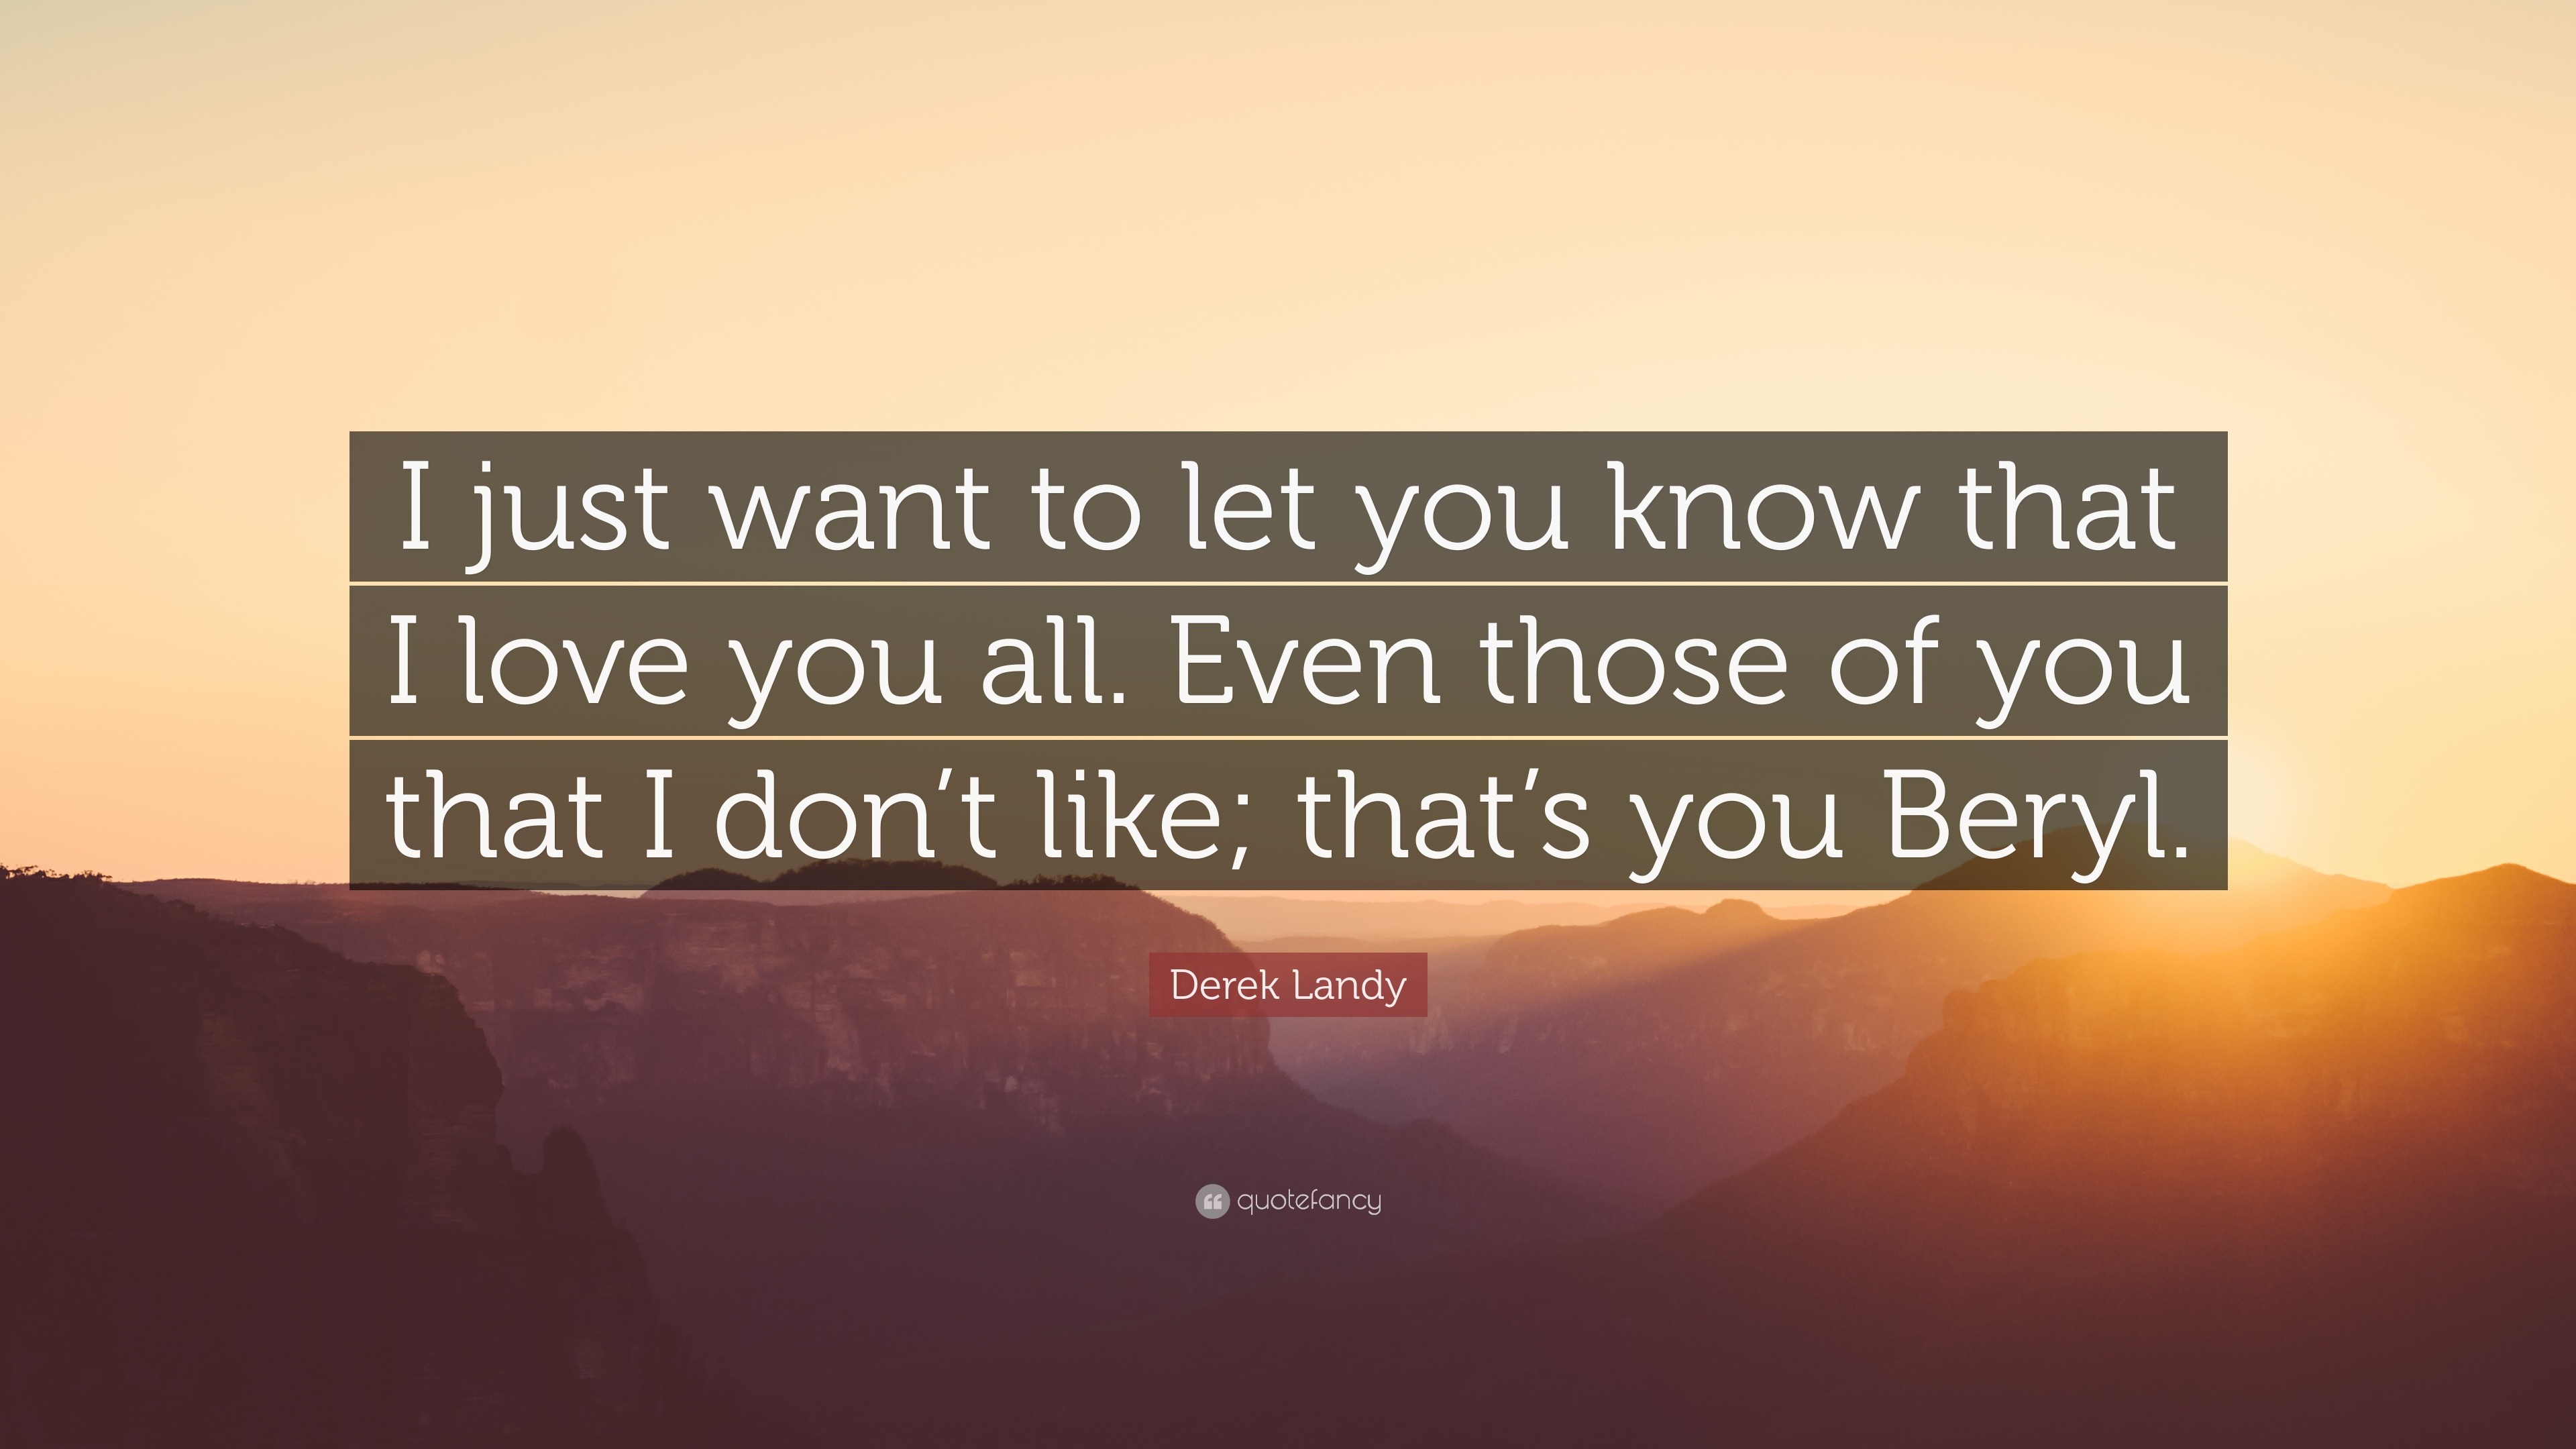 Derek Landy Quote: “I just want to let you know that I ...